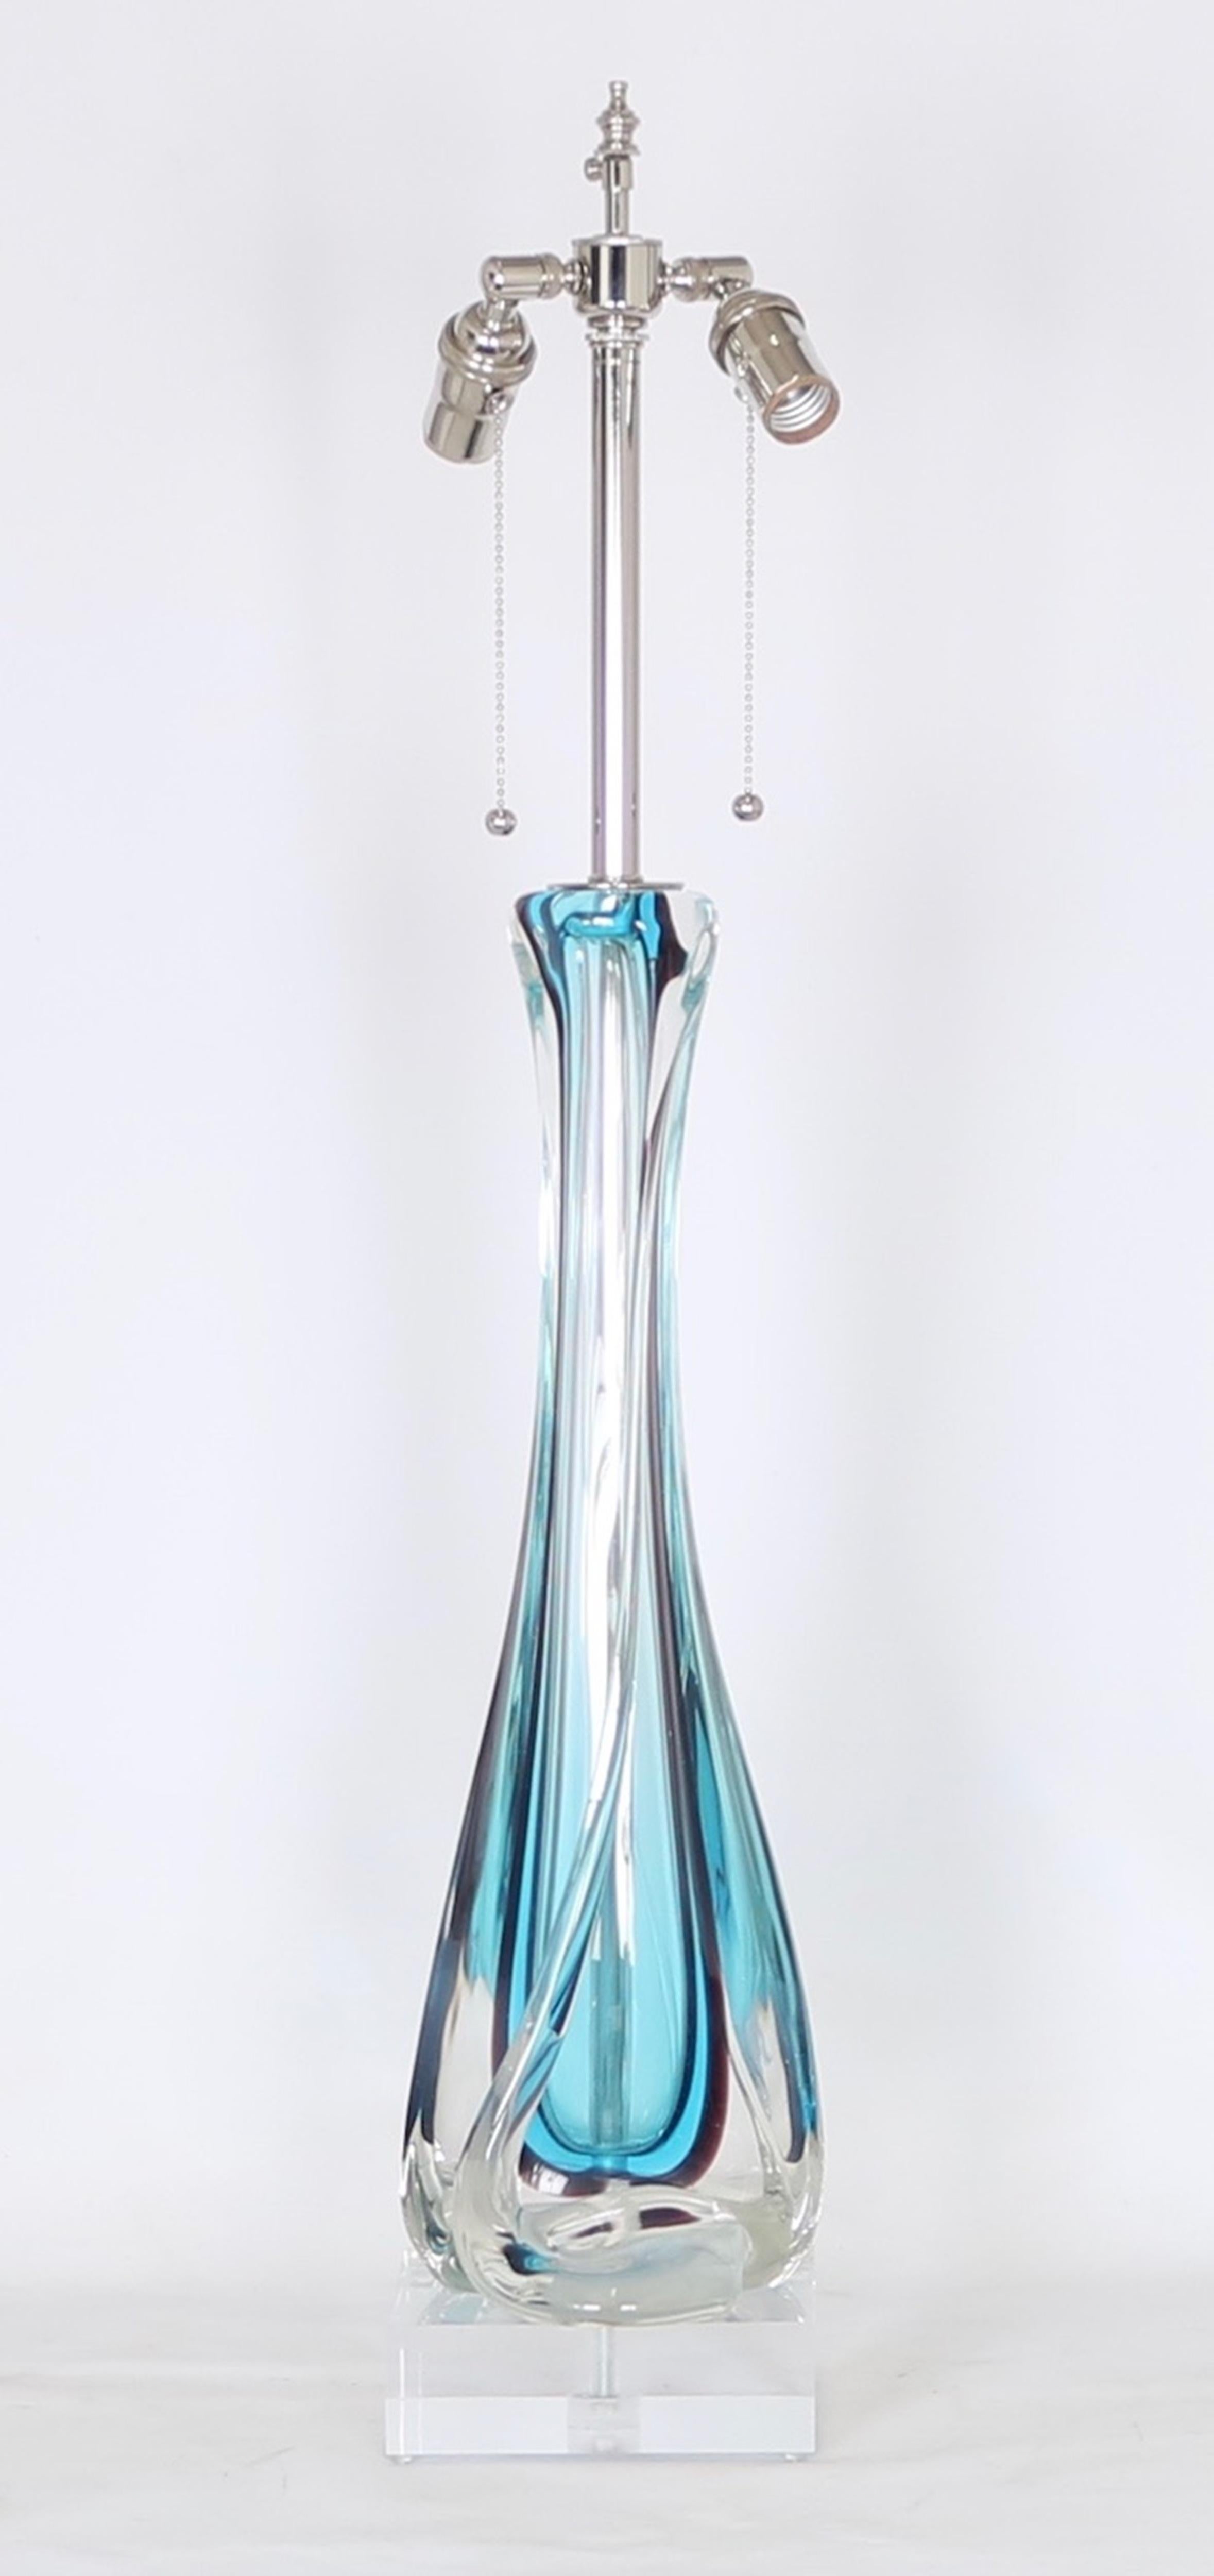 Archimide Seguso Murano Glass lamp from the 1950s. Features include a blue and clear sommerso glass body on a thick Lucite base. The lamp has been fully restored with all new wiring and hardware, including a double socket cluster. Wear appropriate